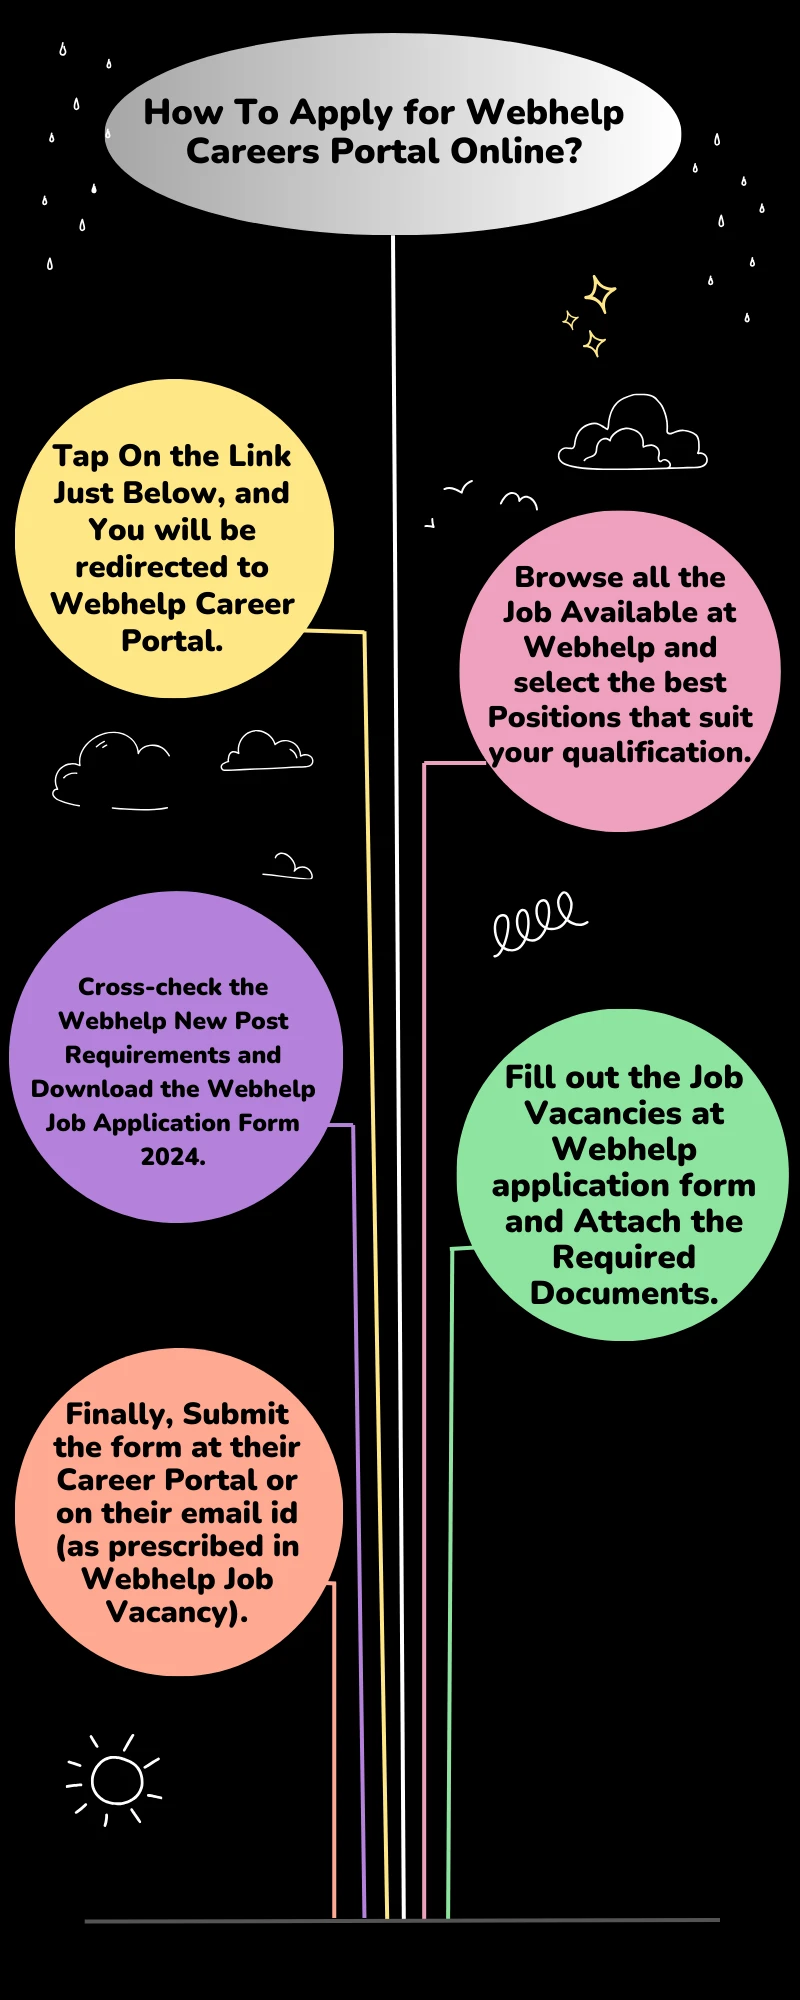 How To Apply for Webhelp Careers Portal Online?